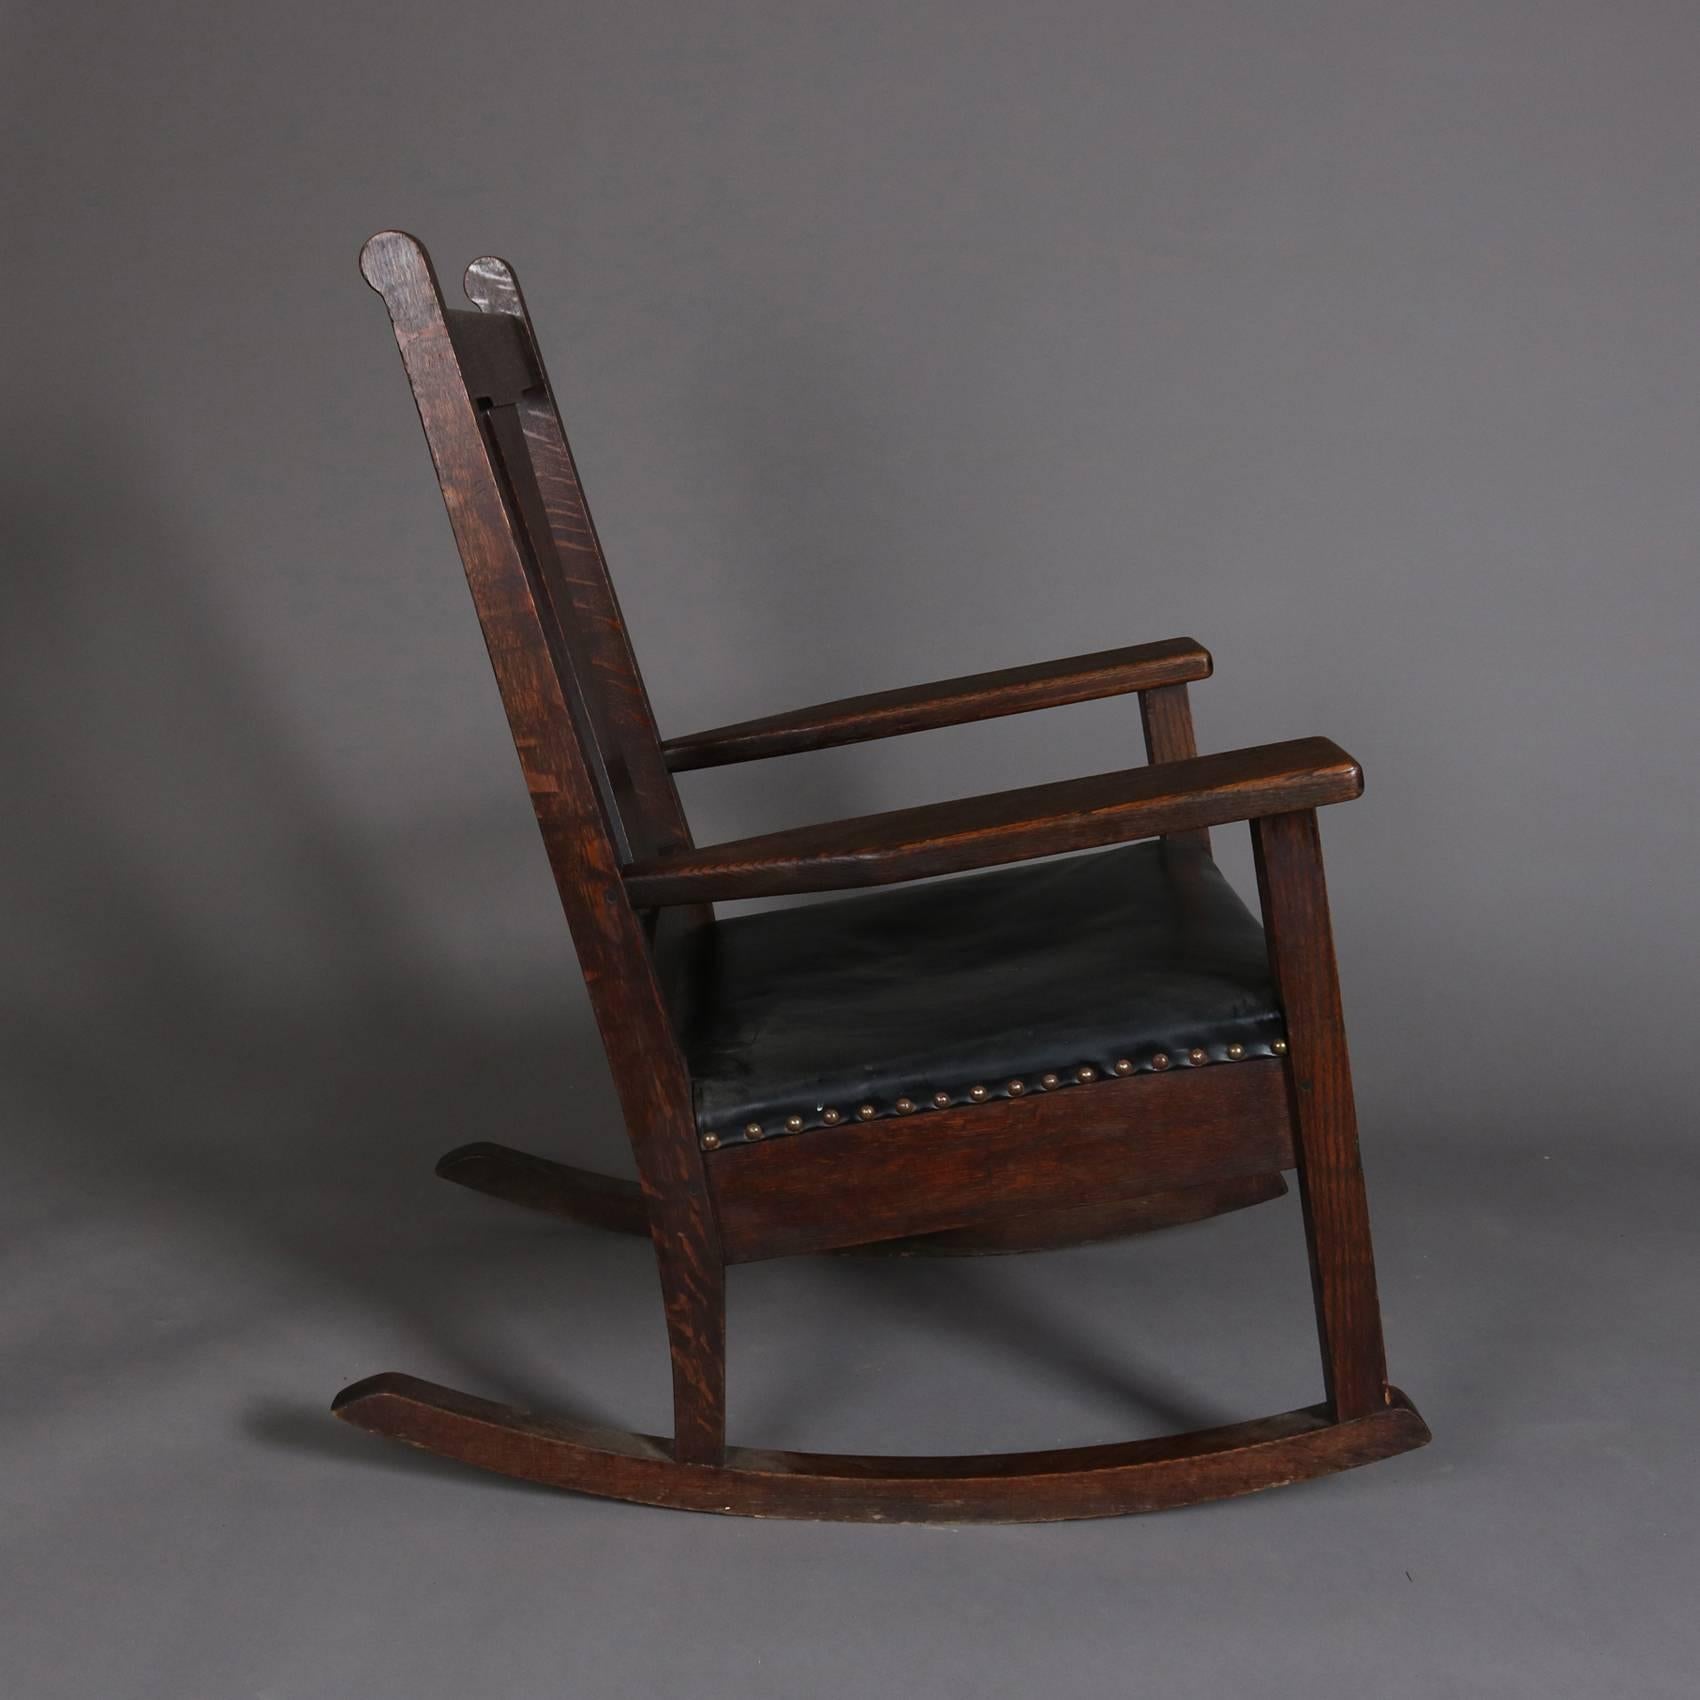 Antique Arts & Crafts Mission Oak Rocking Chair by Roycroft, Signed 1